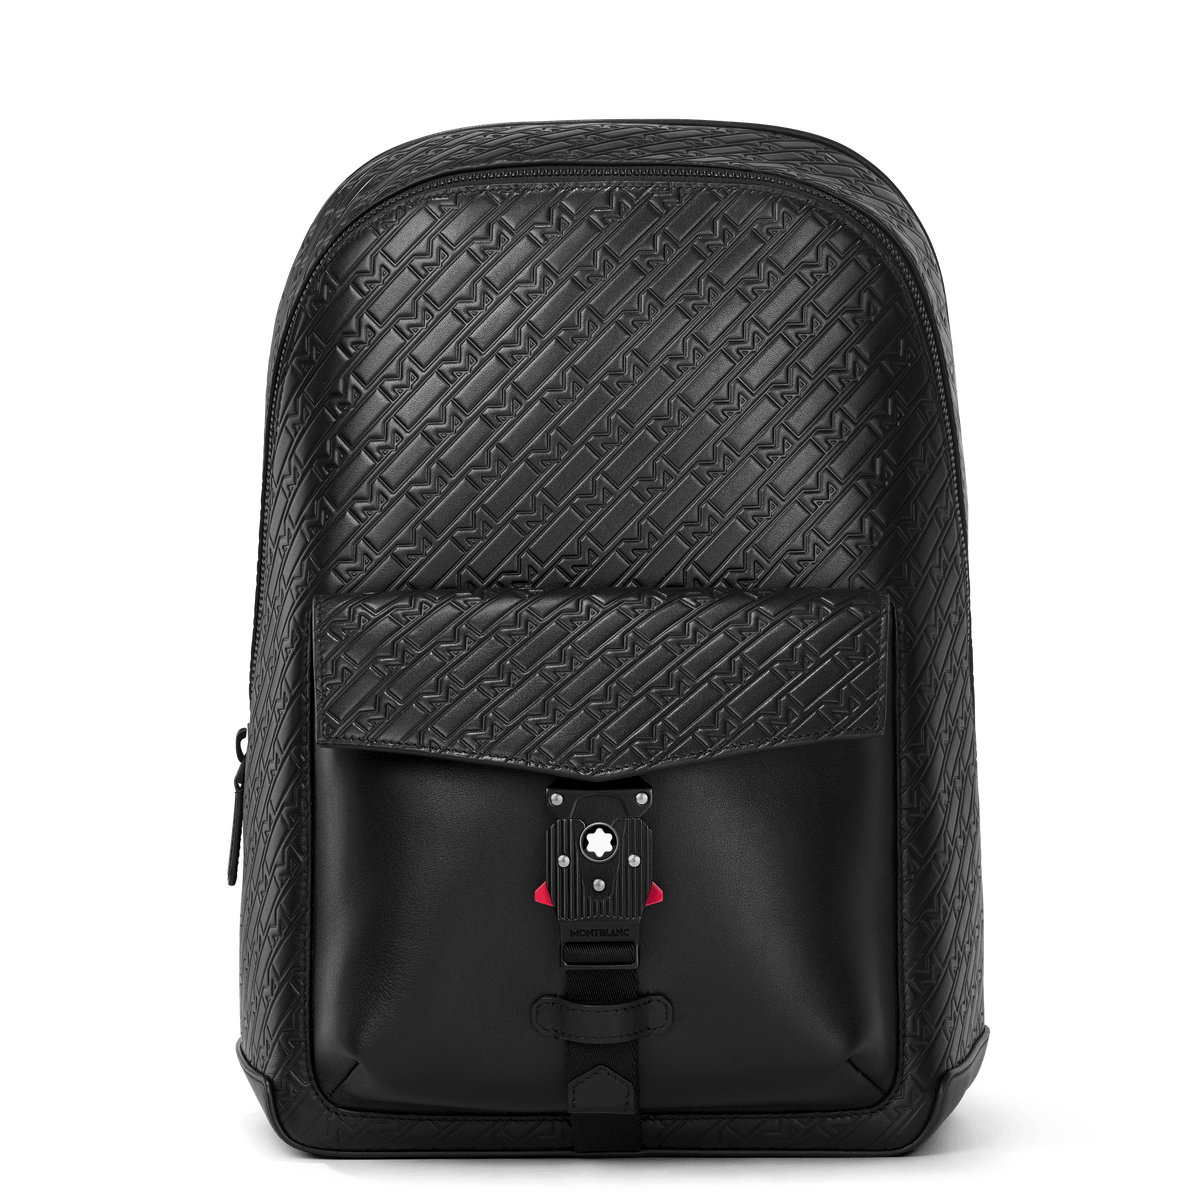 Montblanc M_Gram 4810 backpack with M LOCK 4810 buckle